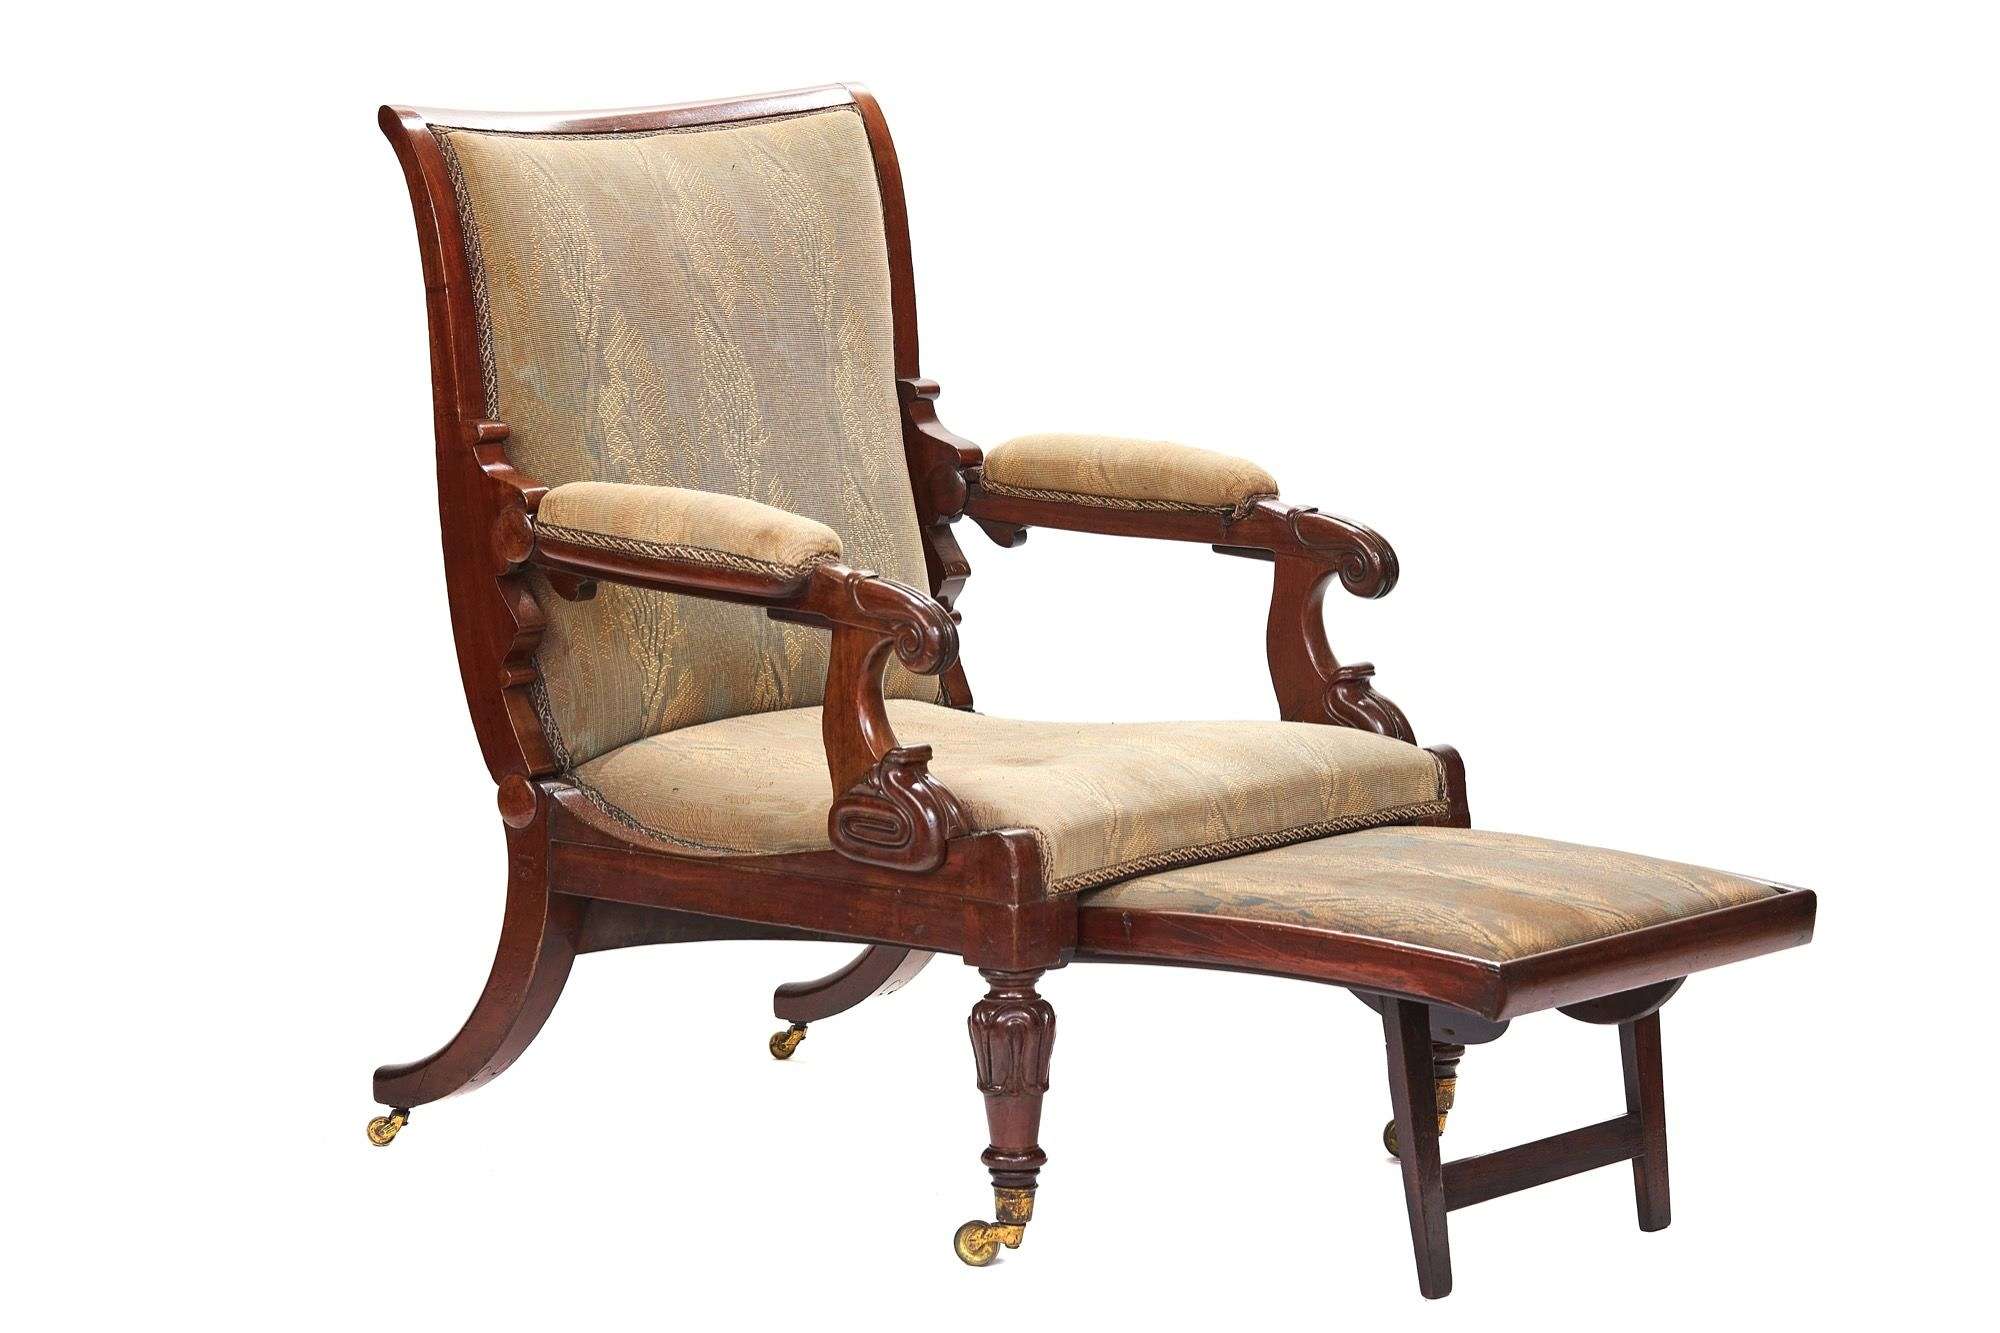 Daws Patent improved Reclining chair circa 1830